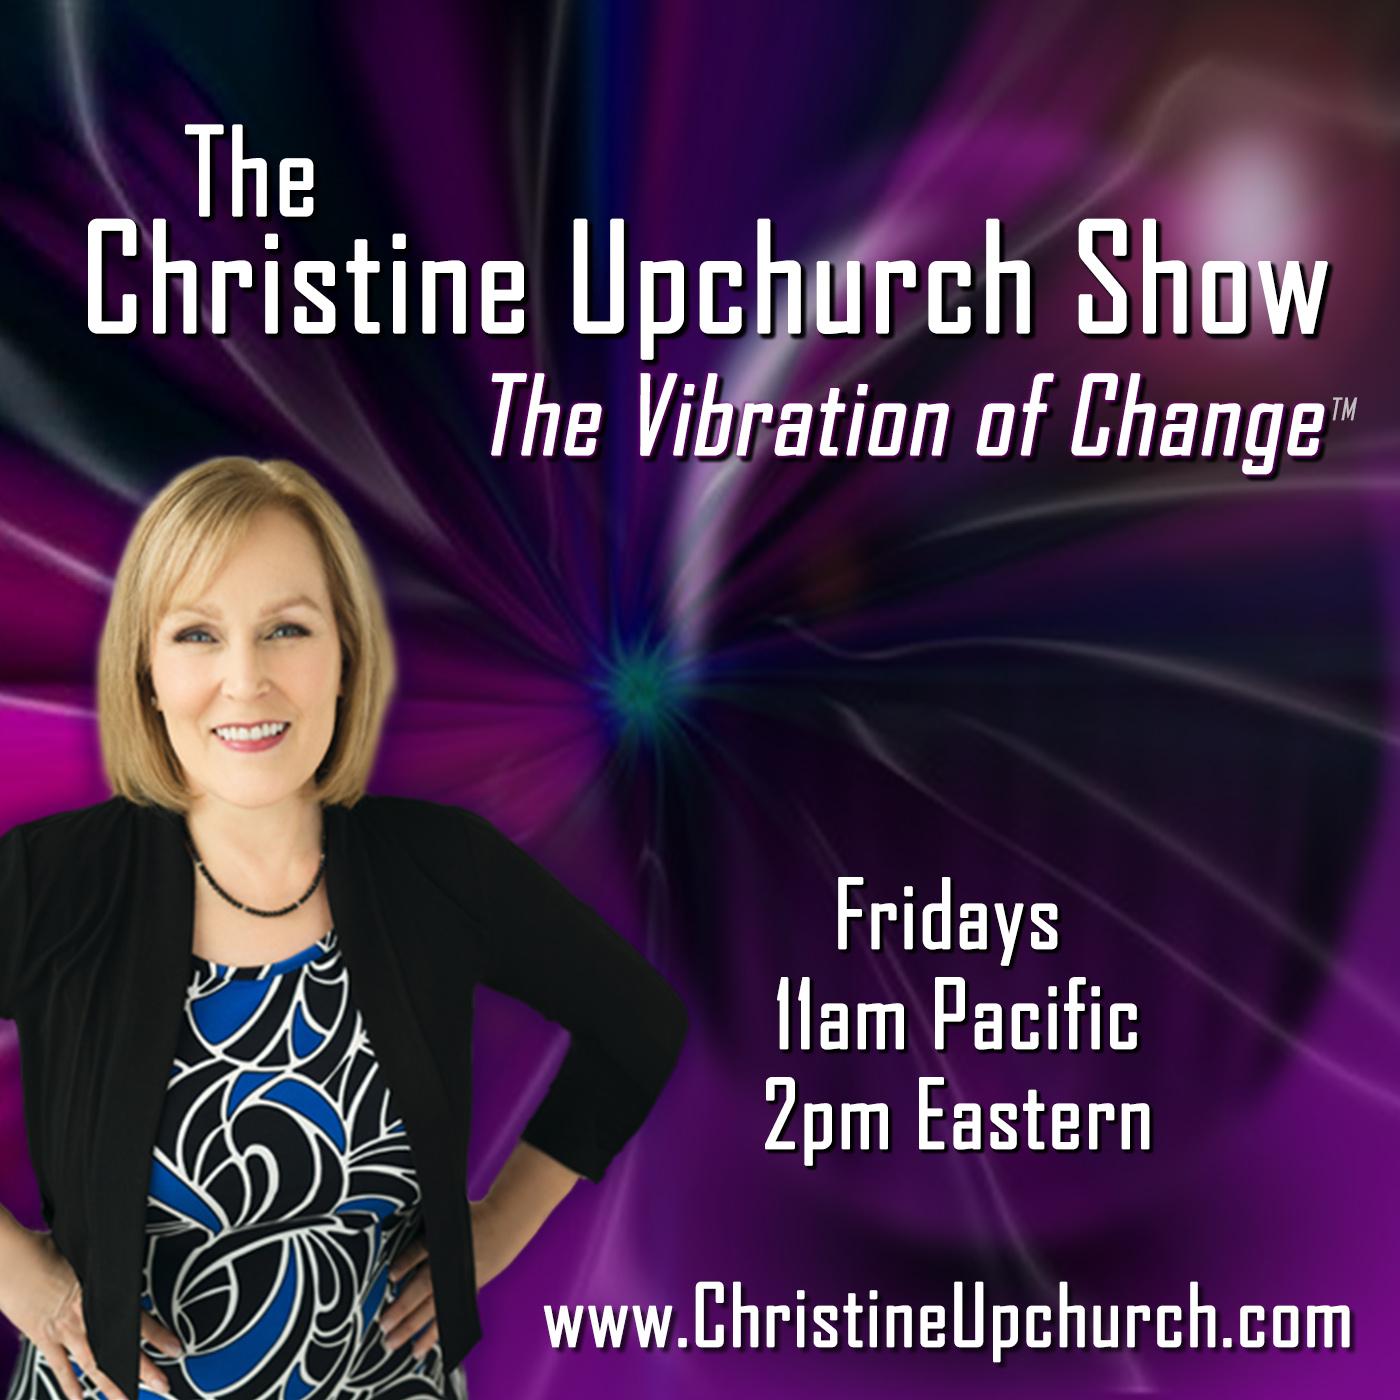 The Christine Upchurch Show - The Vibration of Change™